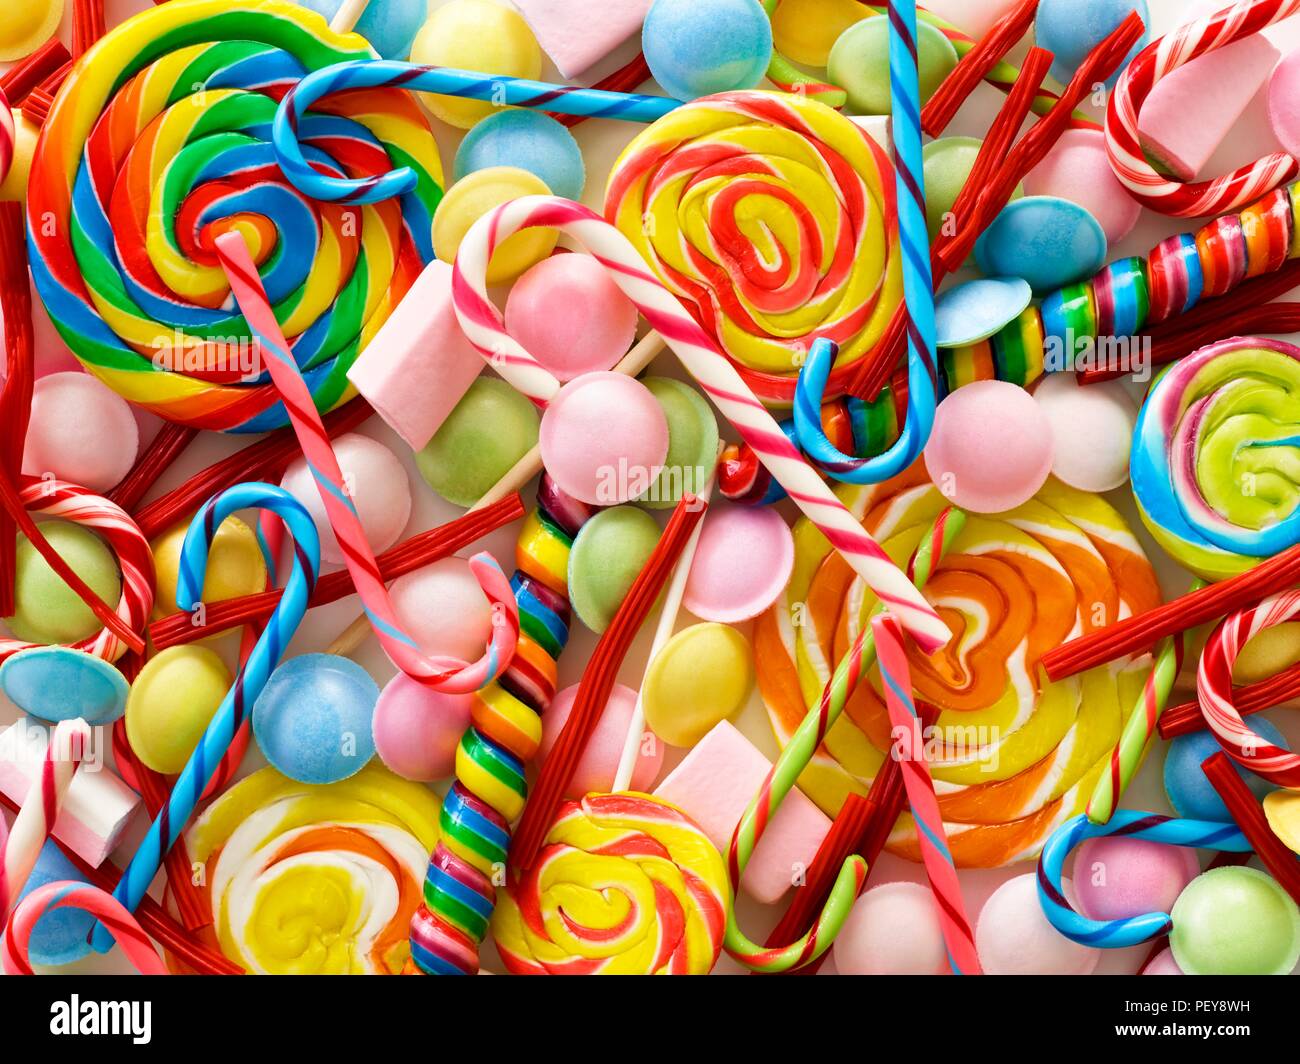 Dolci e candy canes, full frame. Foto Stock